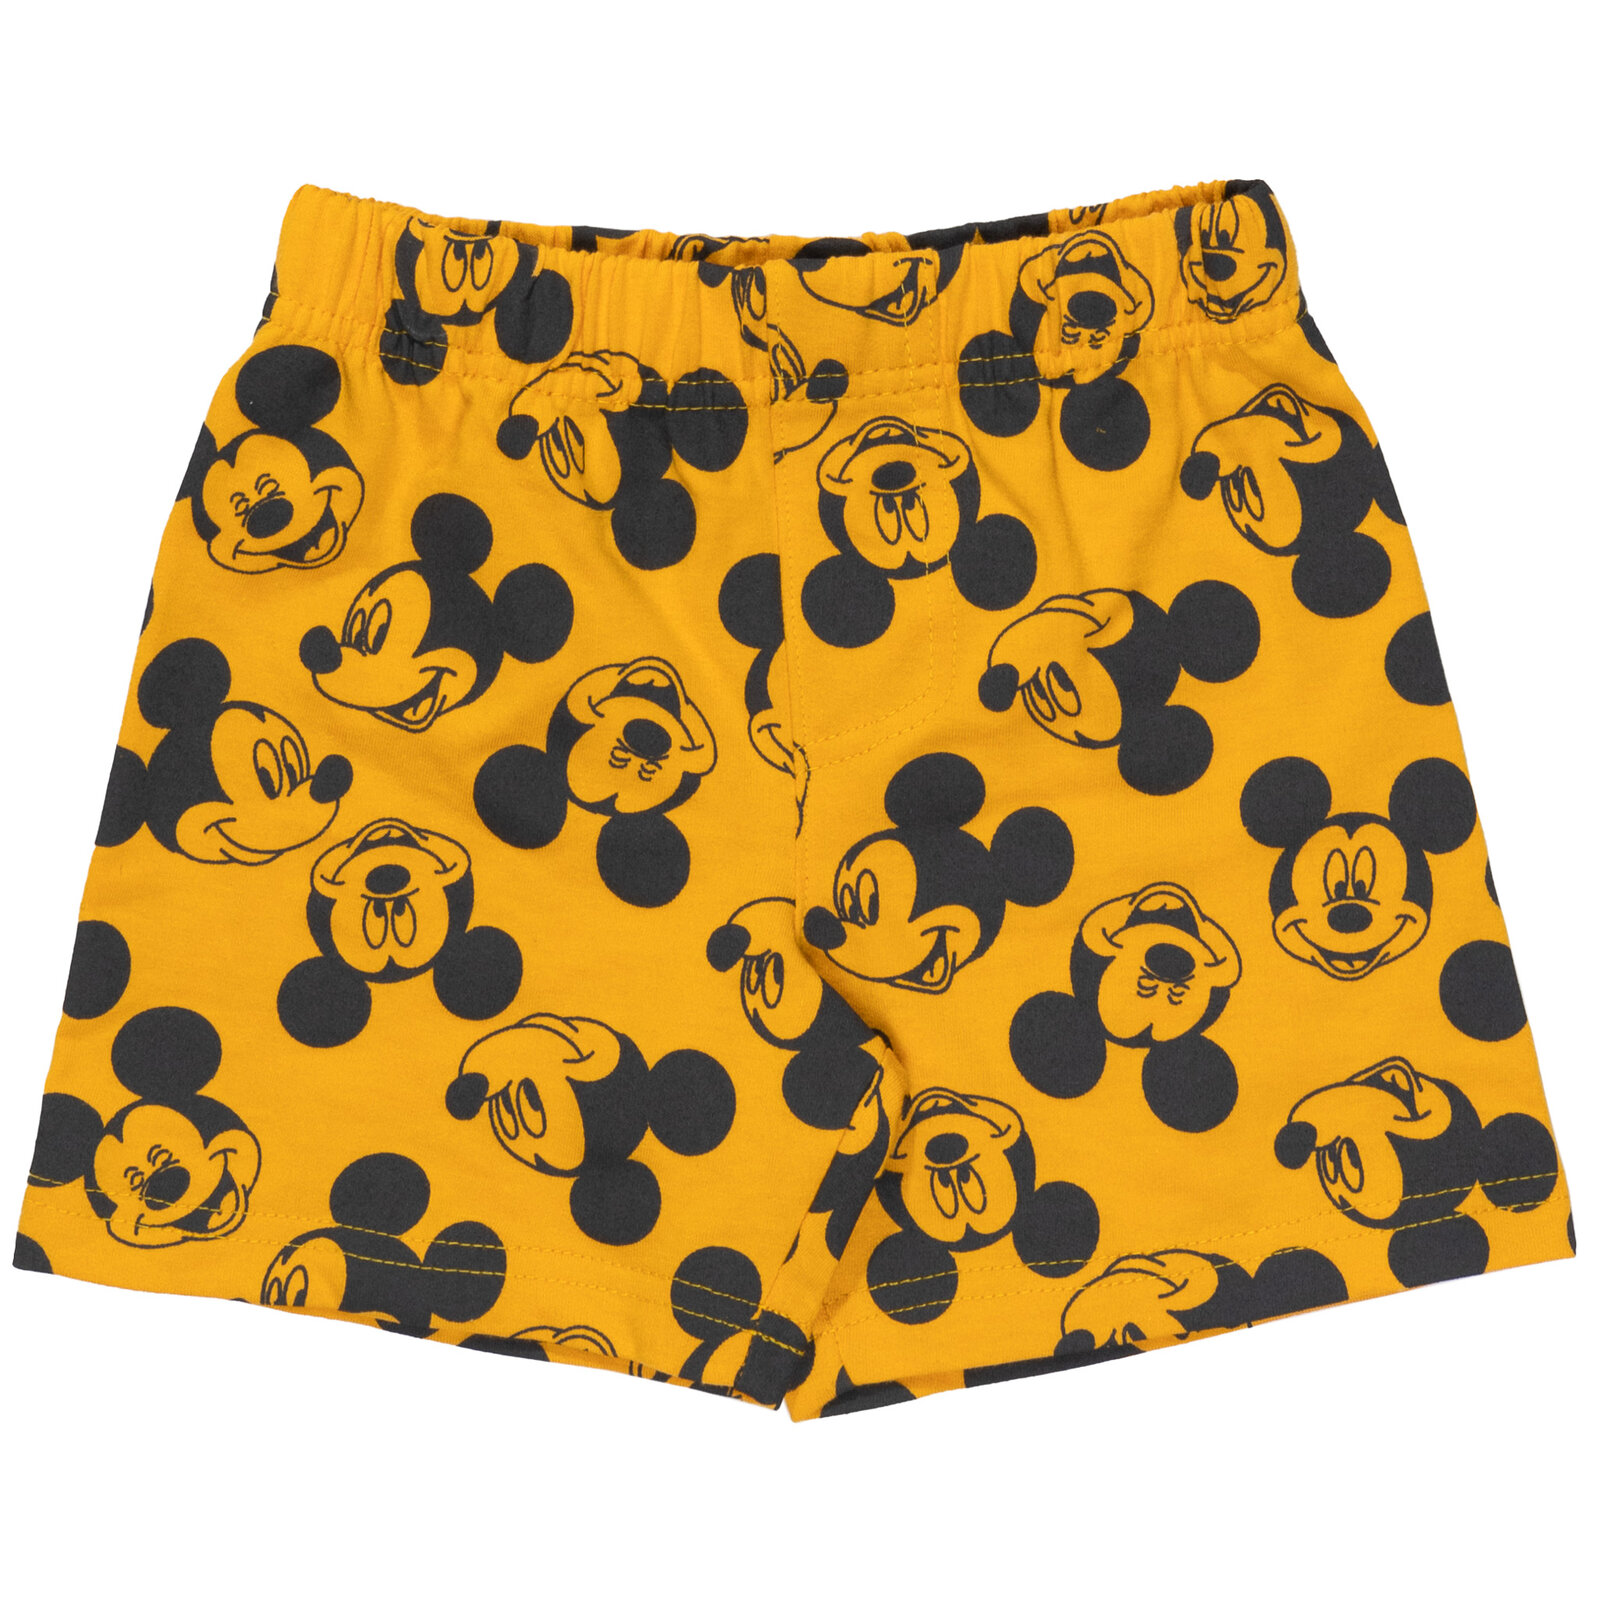 Disney Mickey Mouse Newborn Baby Boys French Terry Sweatshirt and Shorts Newborn to Toddler - image 3 of 5